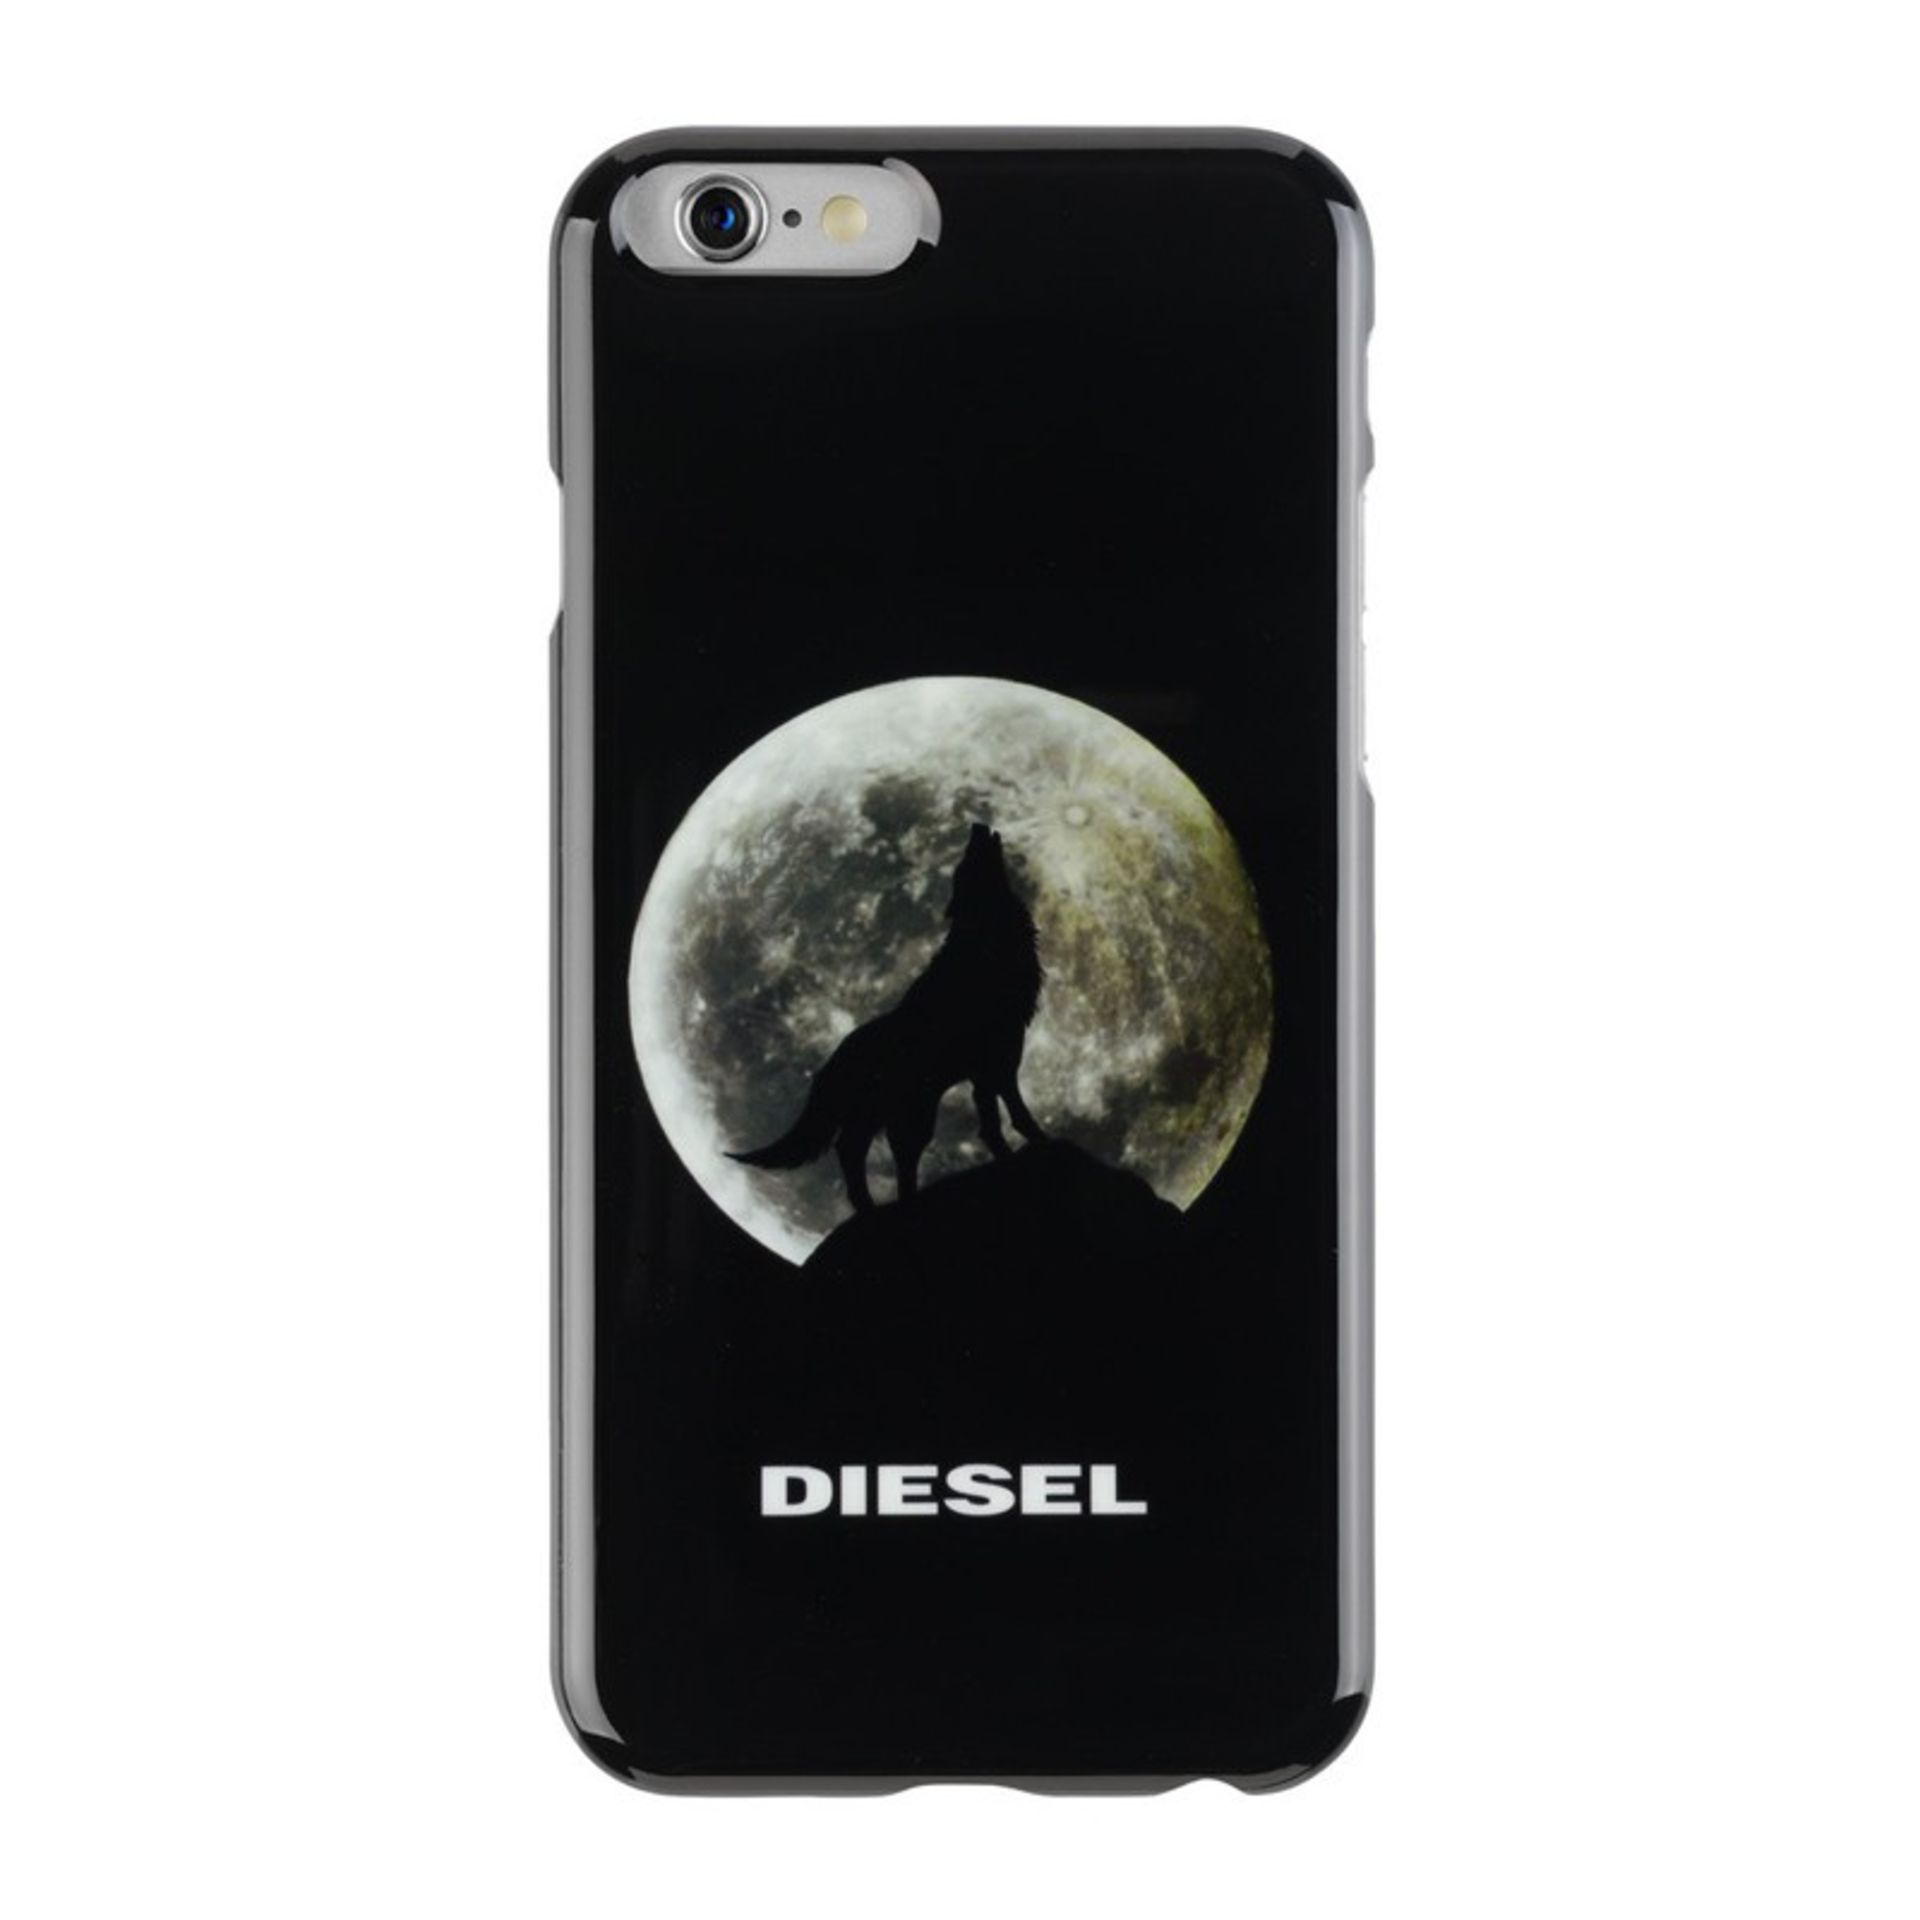 V *TRADE QTY* Brand New Diesel Pluton 6 Hard Snap Case For iPhone 6 ISP Price 19.90 Euros X 7 YOUR